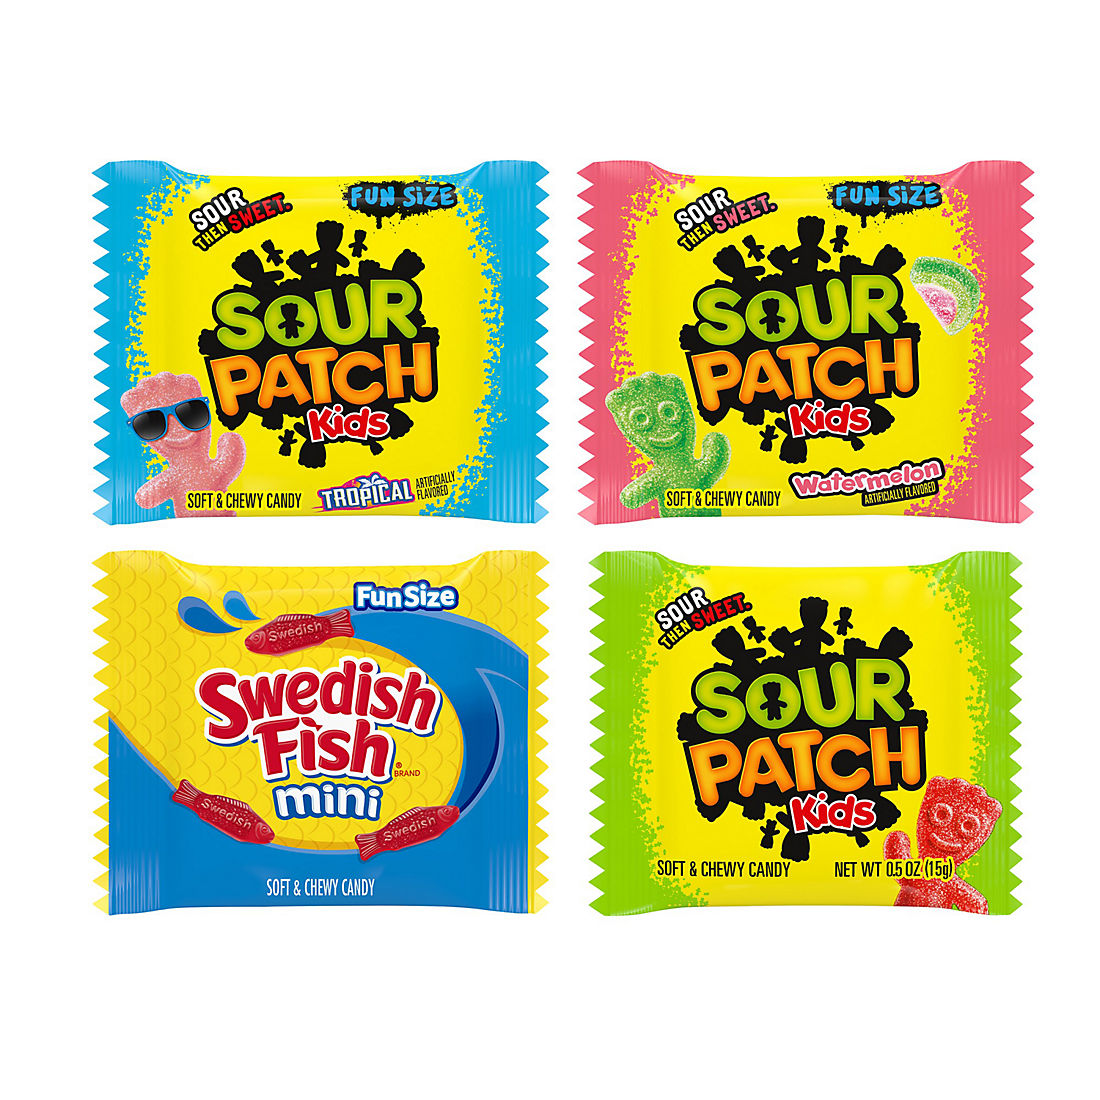 Sour Patch Kids and Swedish Fish Mini and Chewy Candy Packs, 200